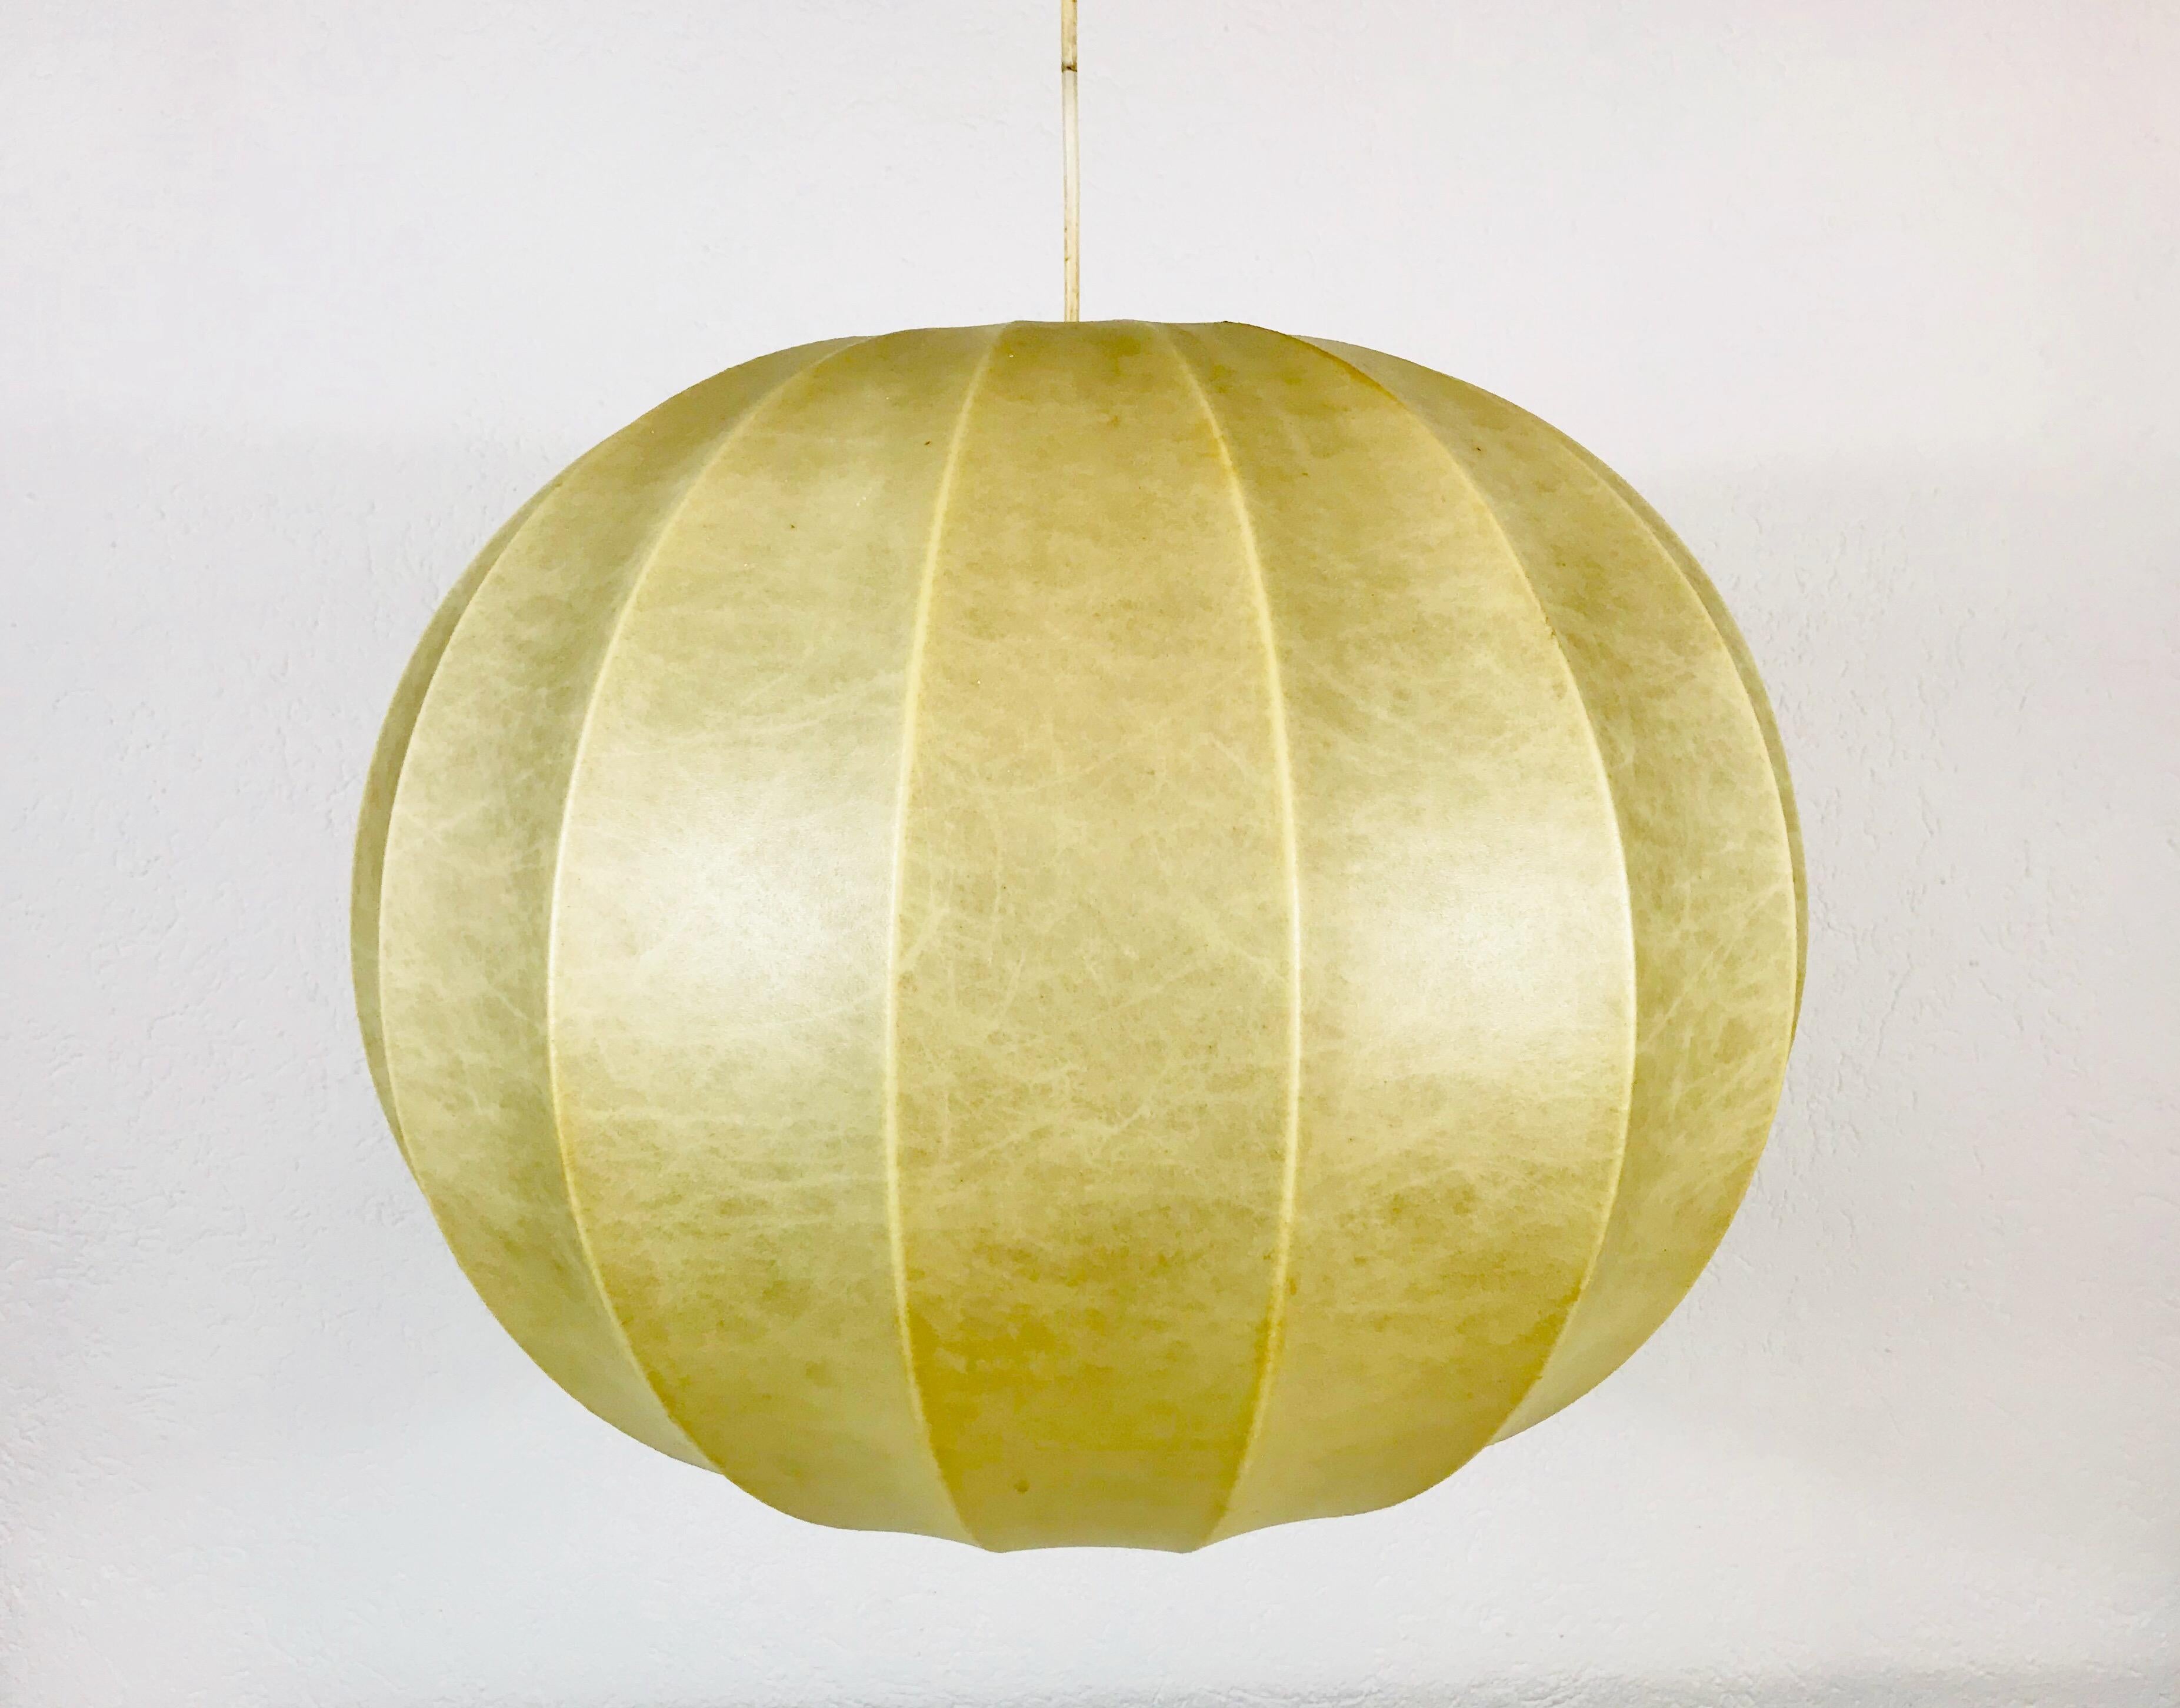 A cocoon hanging lamp made in Italy in the 1960s. It has a beautiful round design, which is similar to the lamps made by Castiglioni. 


The light requires one E27 light bulb.